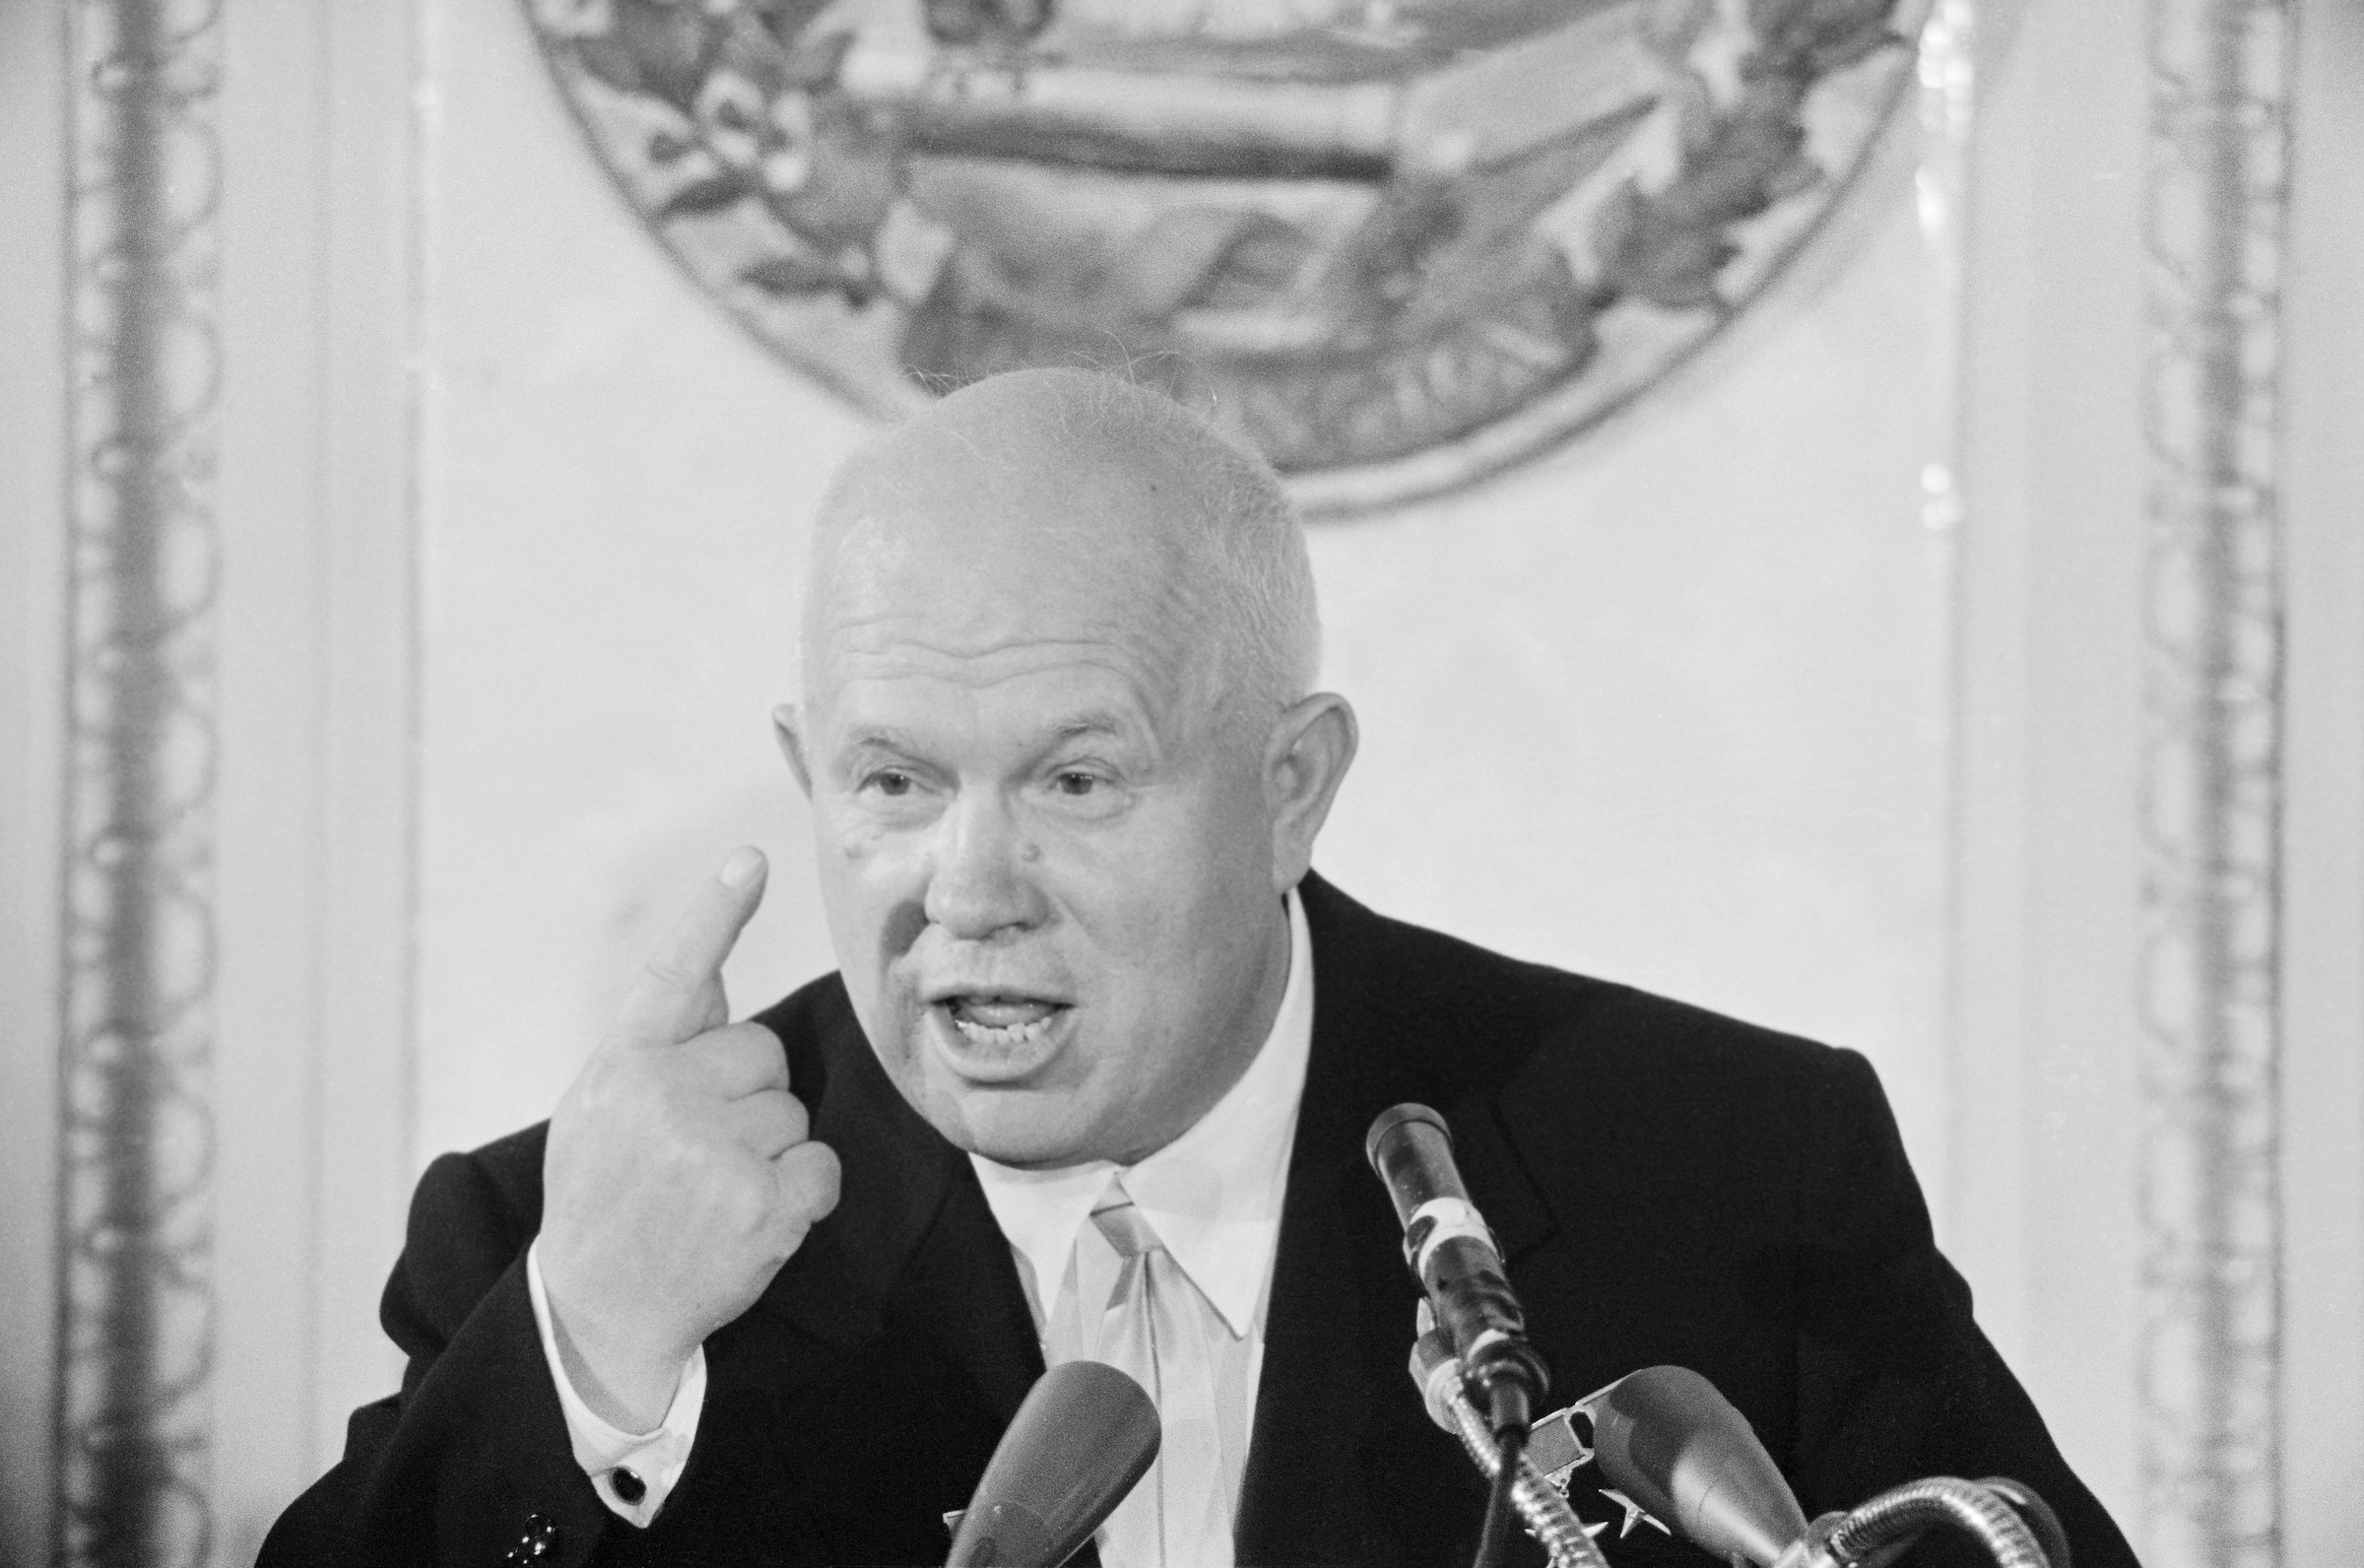 Soviet Premier Nikita Khrushchev makes a point during a press conference at the National Press Club. (Bettmann Archive/Getty Images)